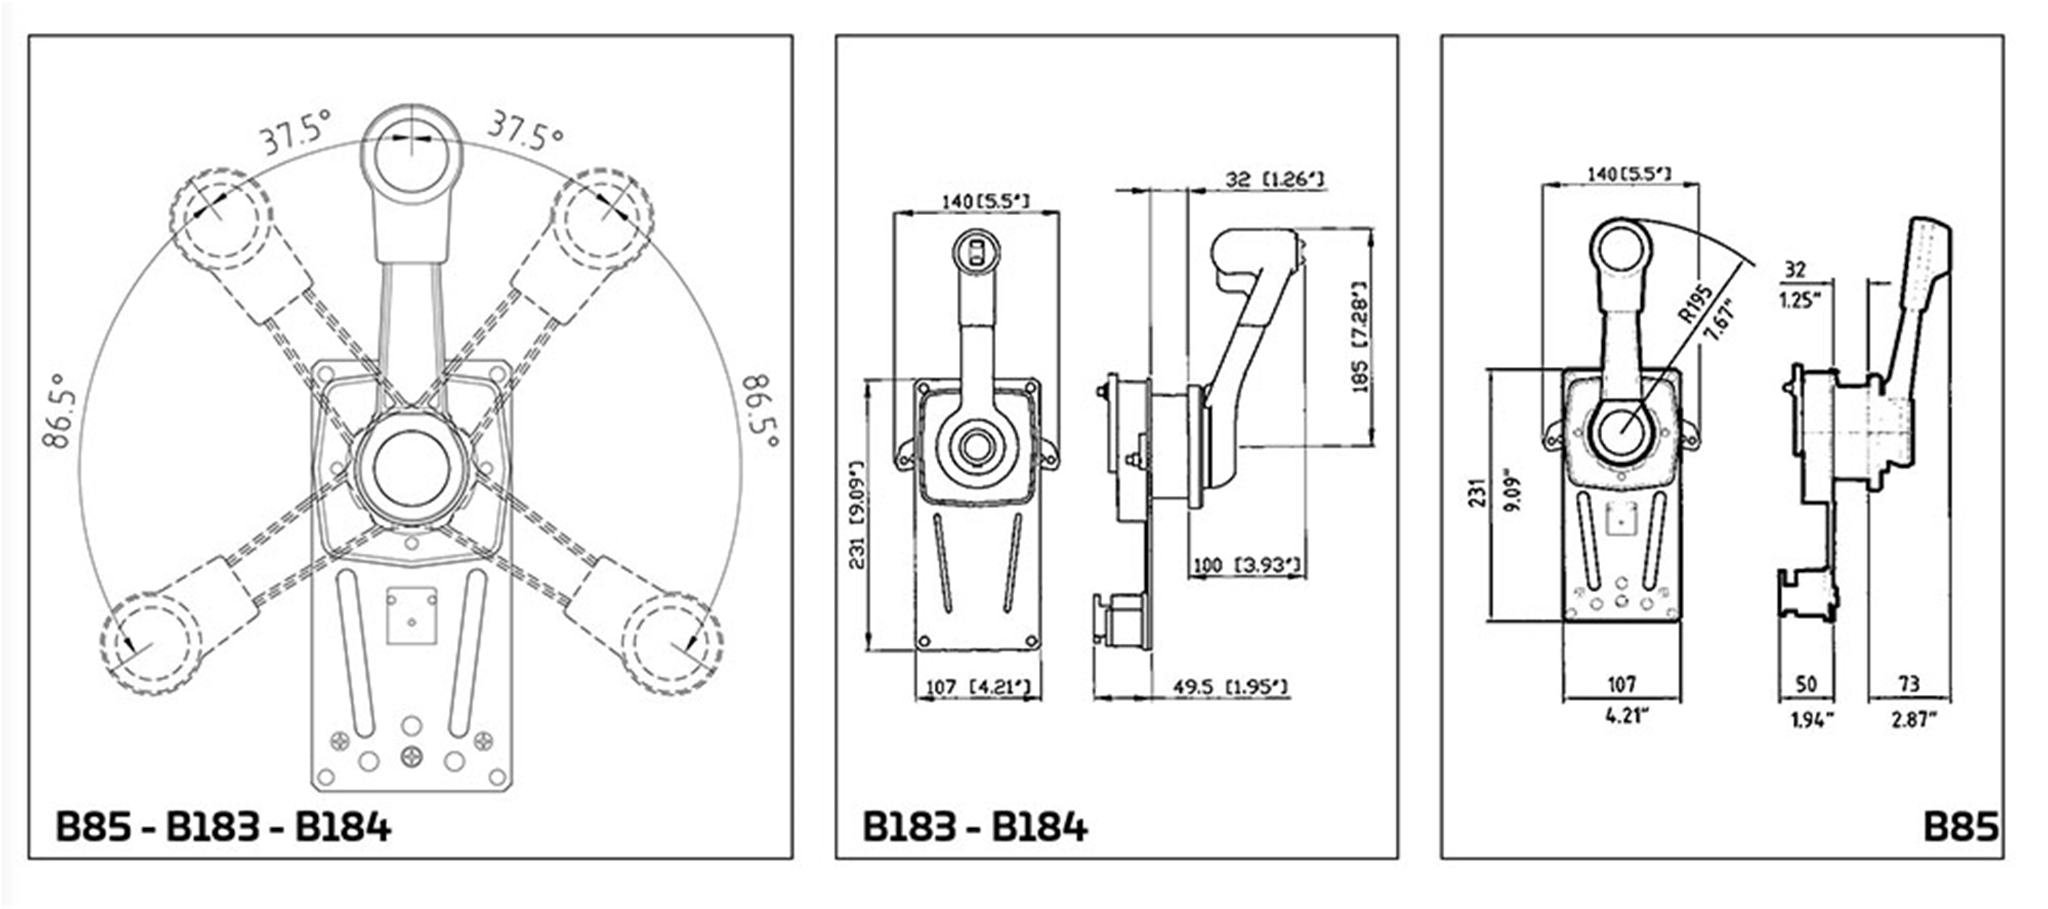 B183 38945 B Single Lever Side Mount Control With Out Trim Specifications